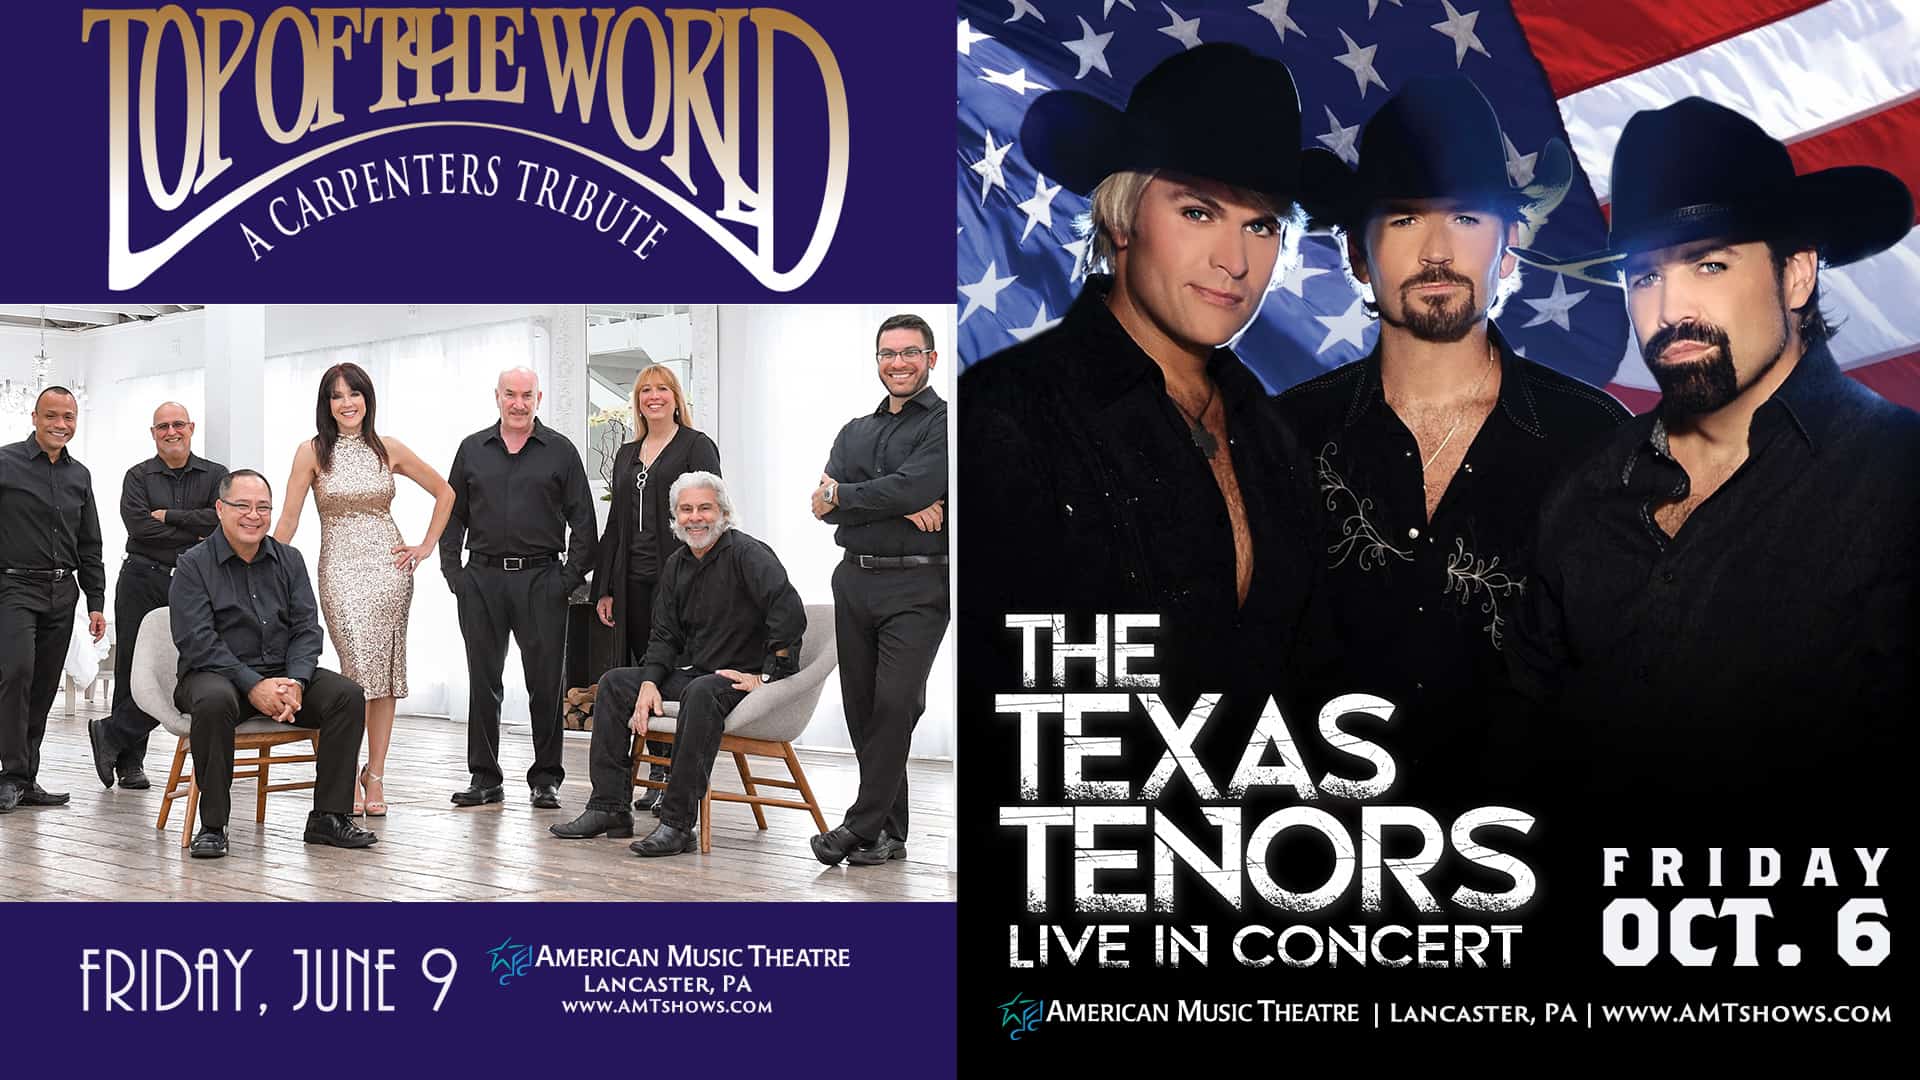 Top of the World Carpenters Tribute and The Texas Tenors